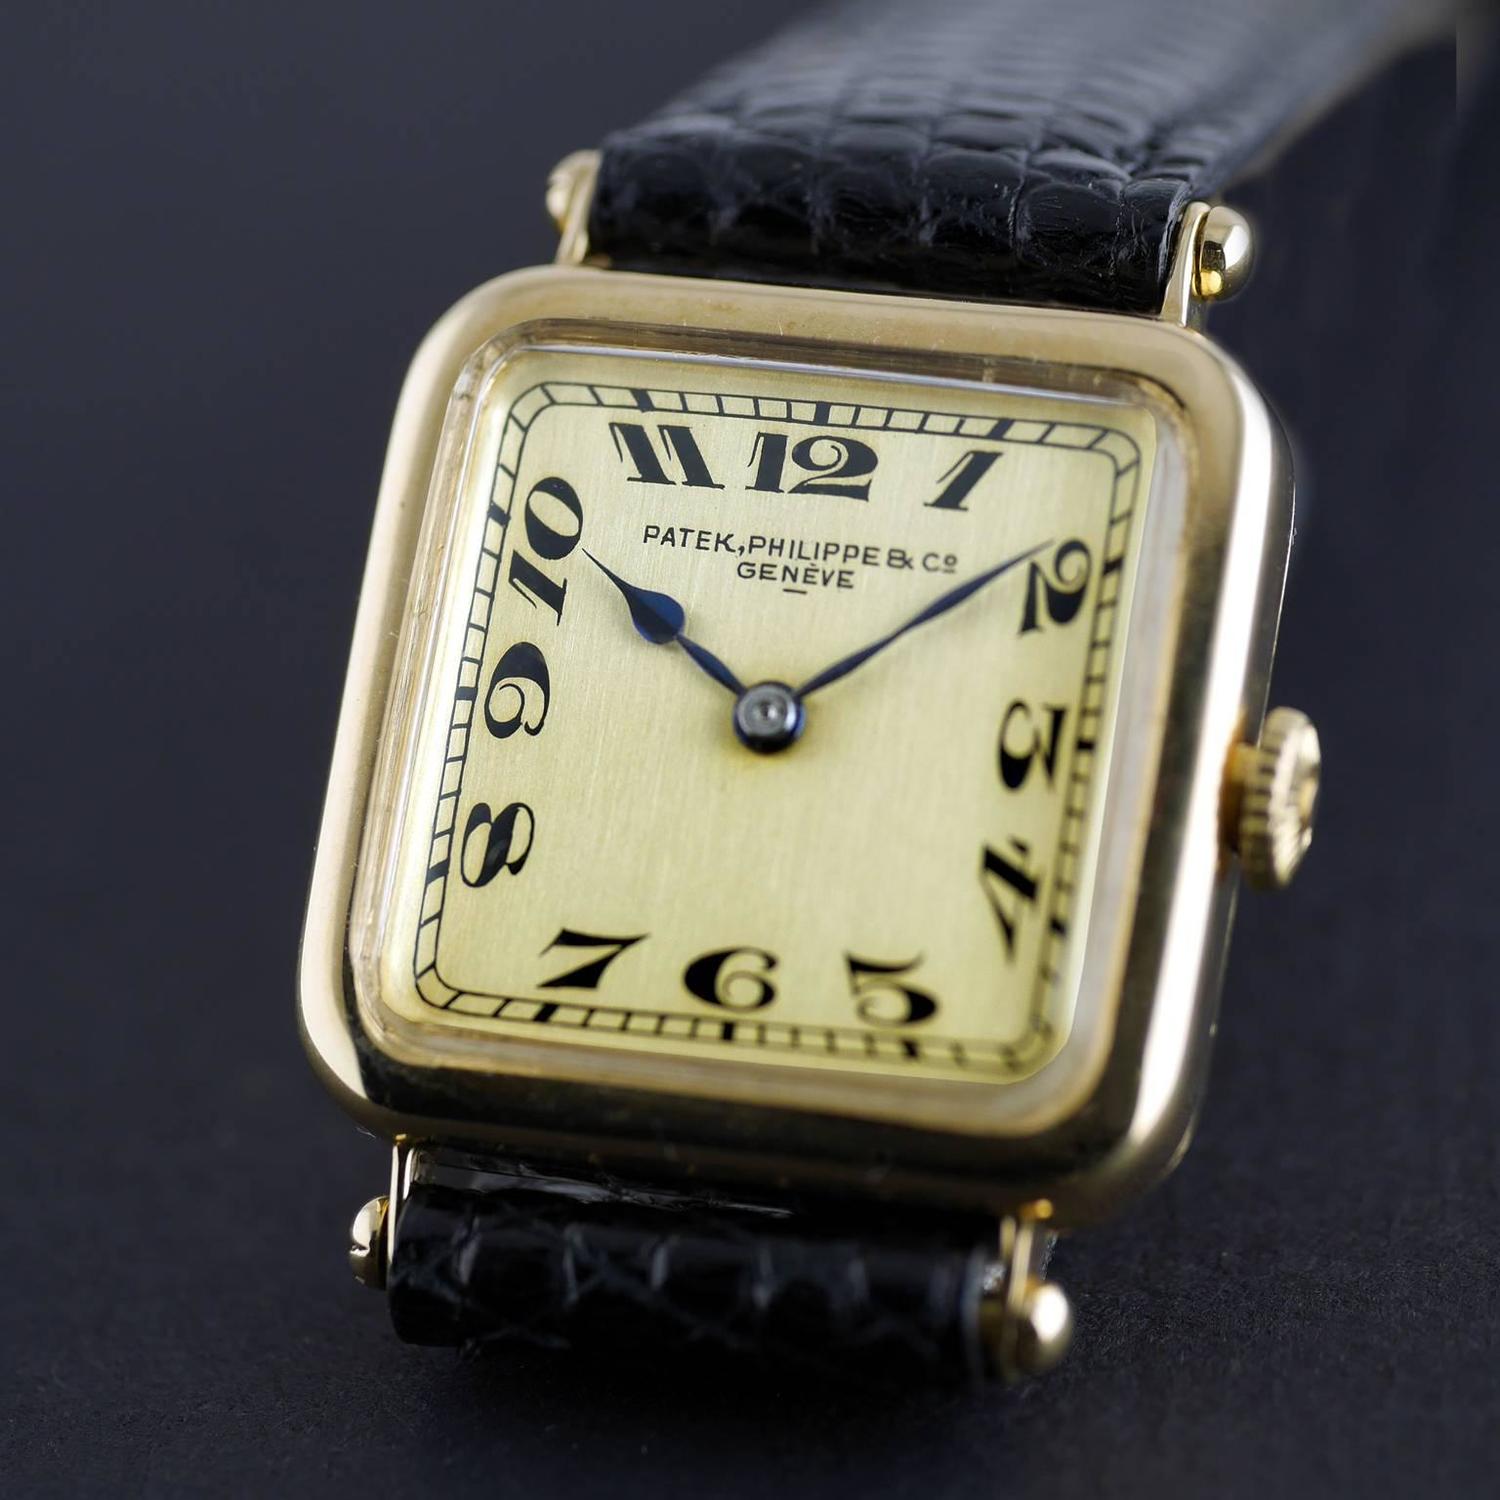 18ct Patek Philippe wristwatch dated 1917 For Sale at 1stdibs